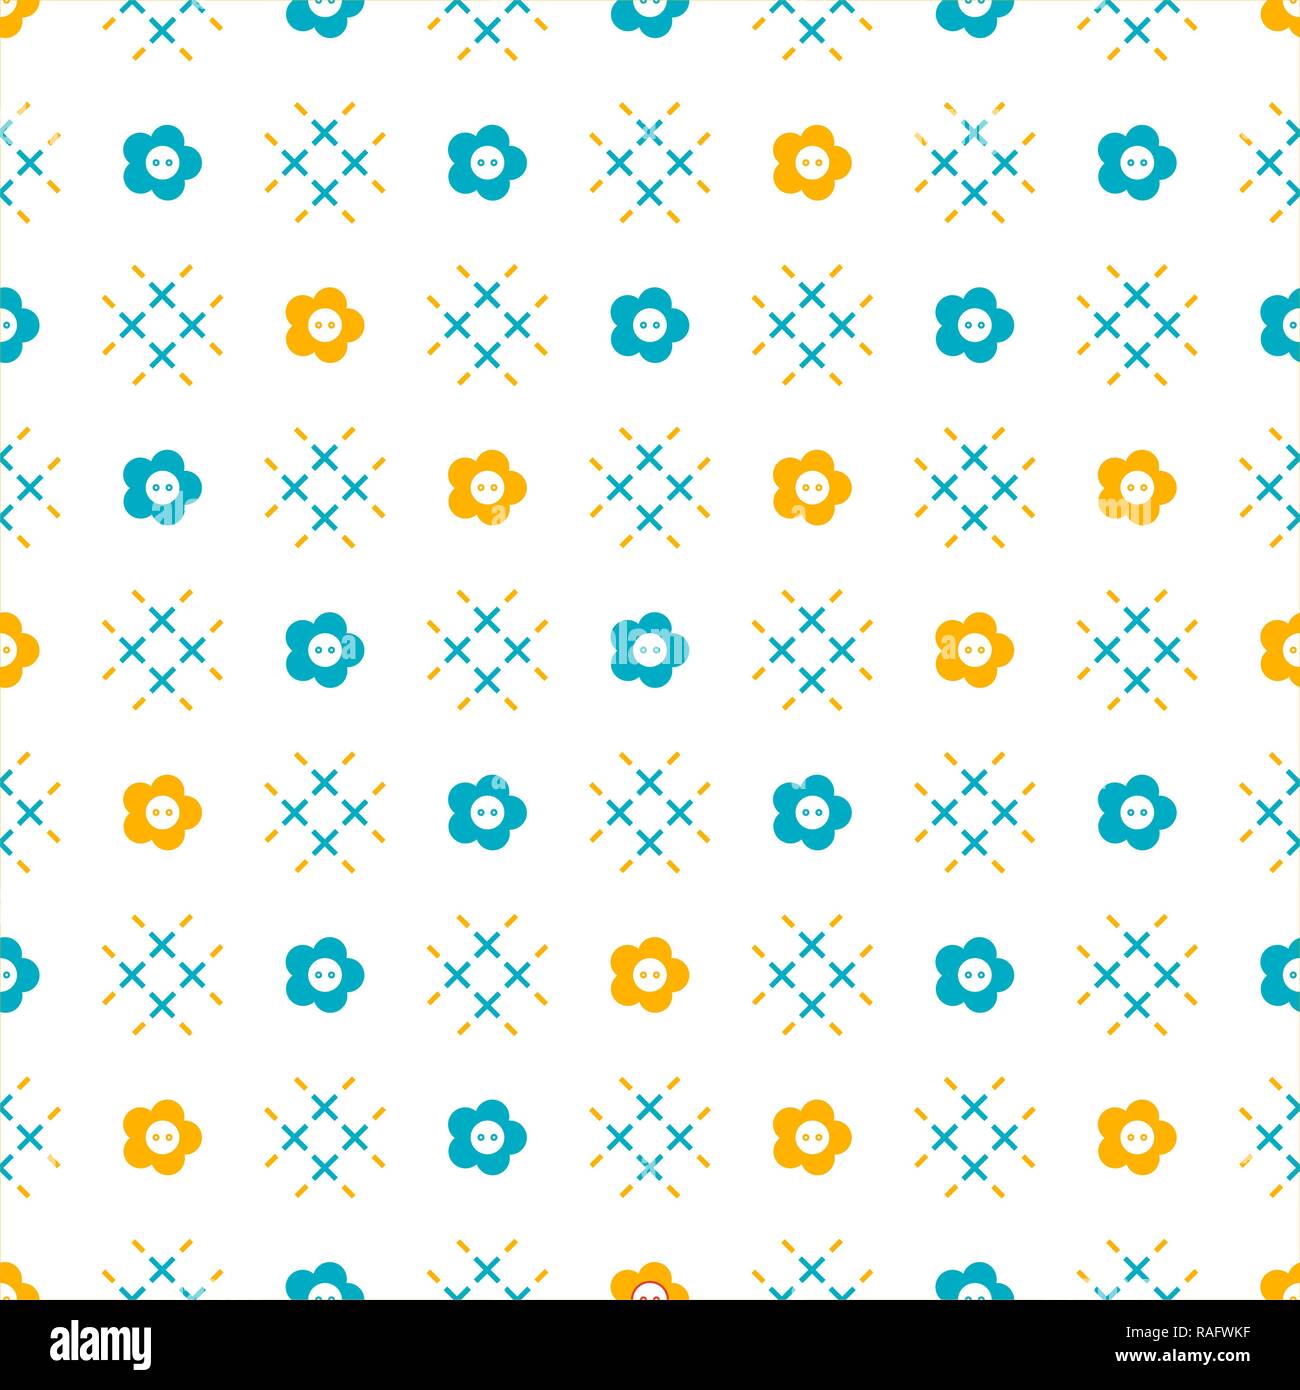 Seamless pattern with buttons. Sewing and needlework background. Template for design, fabric, print. Stock Vector